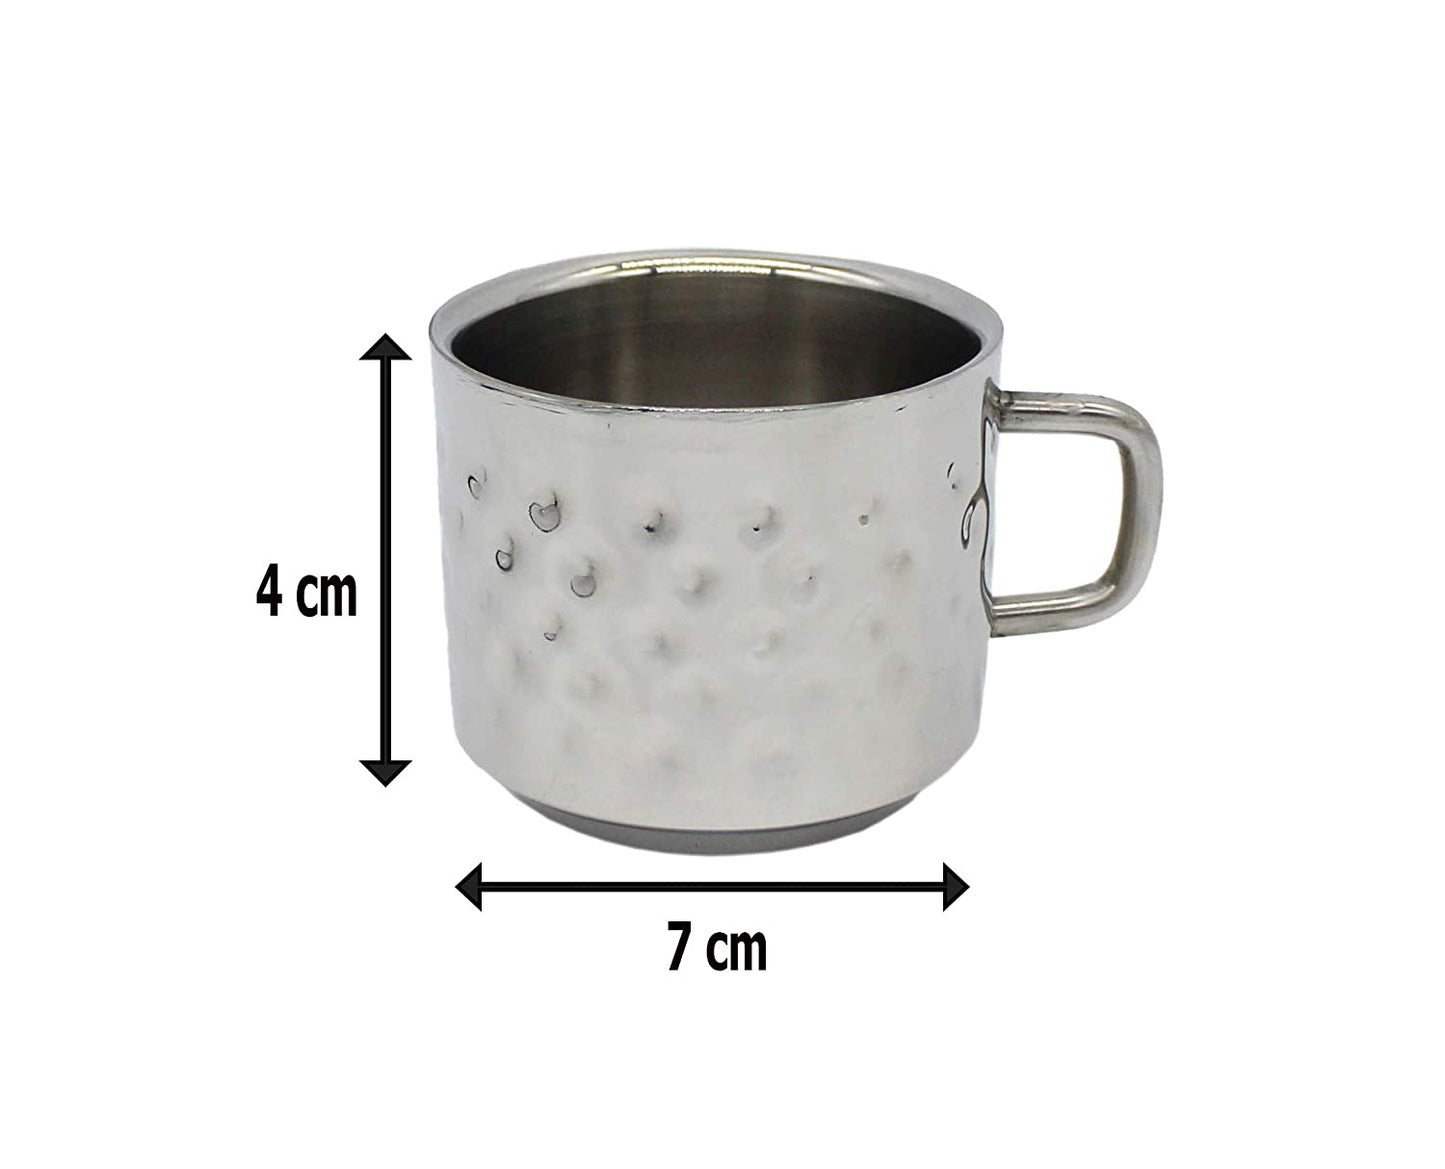 Double Walled Dimple Design Stainless Steel Coffee & Tea Mugs